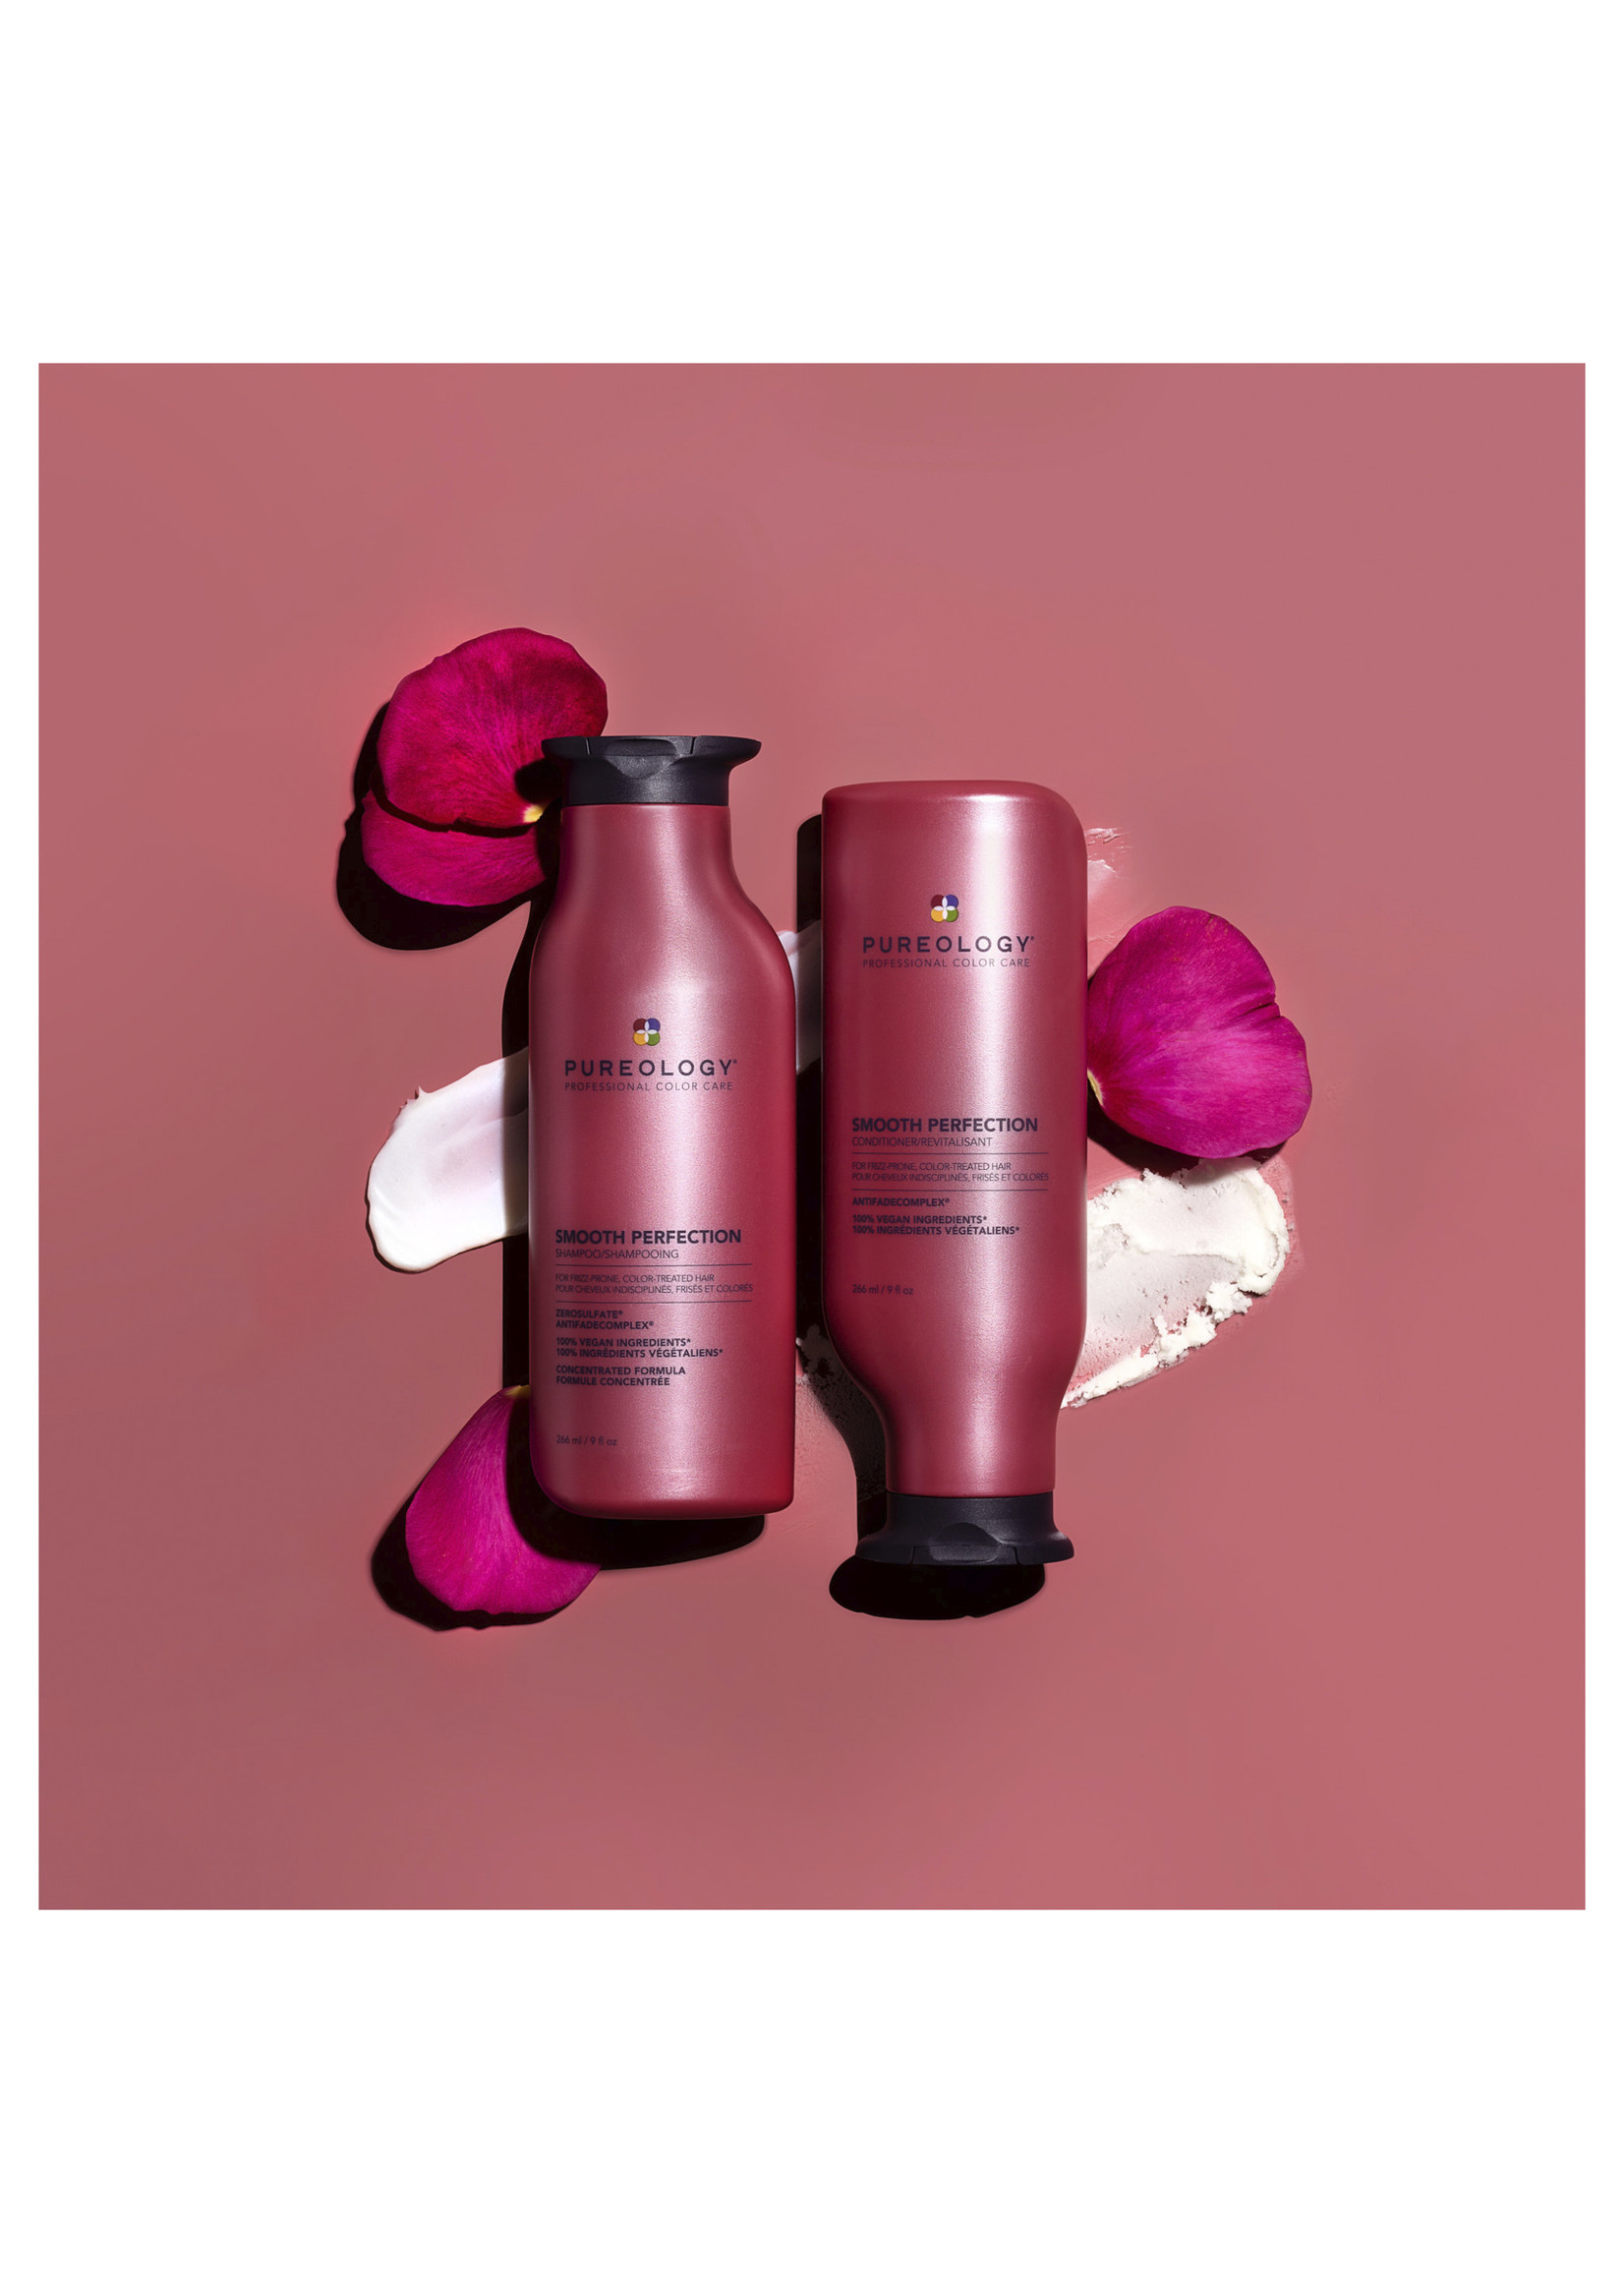 Pureology Smooth Perfection Conditioner | For Frizzy, Color-Treated Hair |  Detangles & Controls Frizz | Sulfate-Free | Vegan